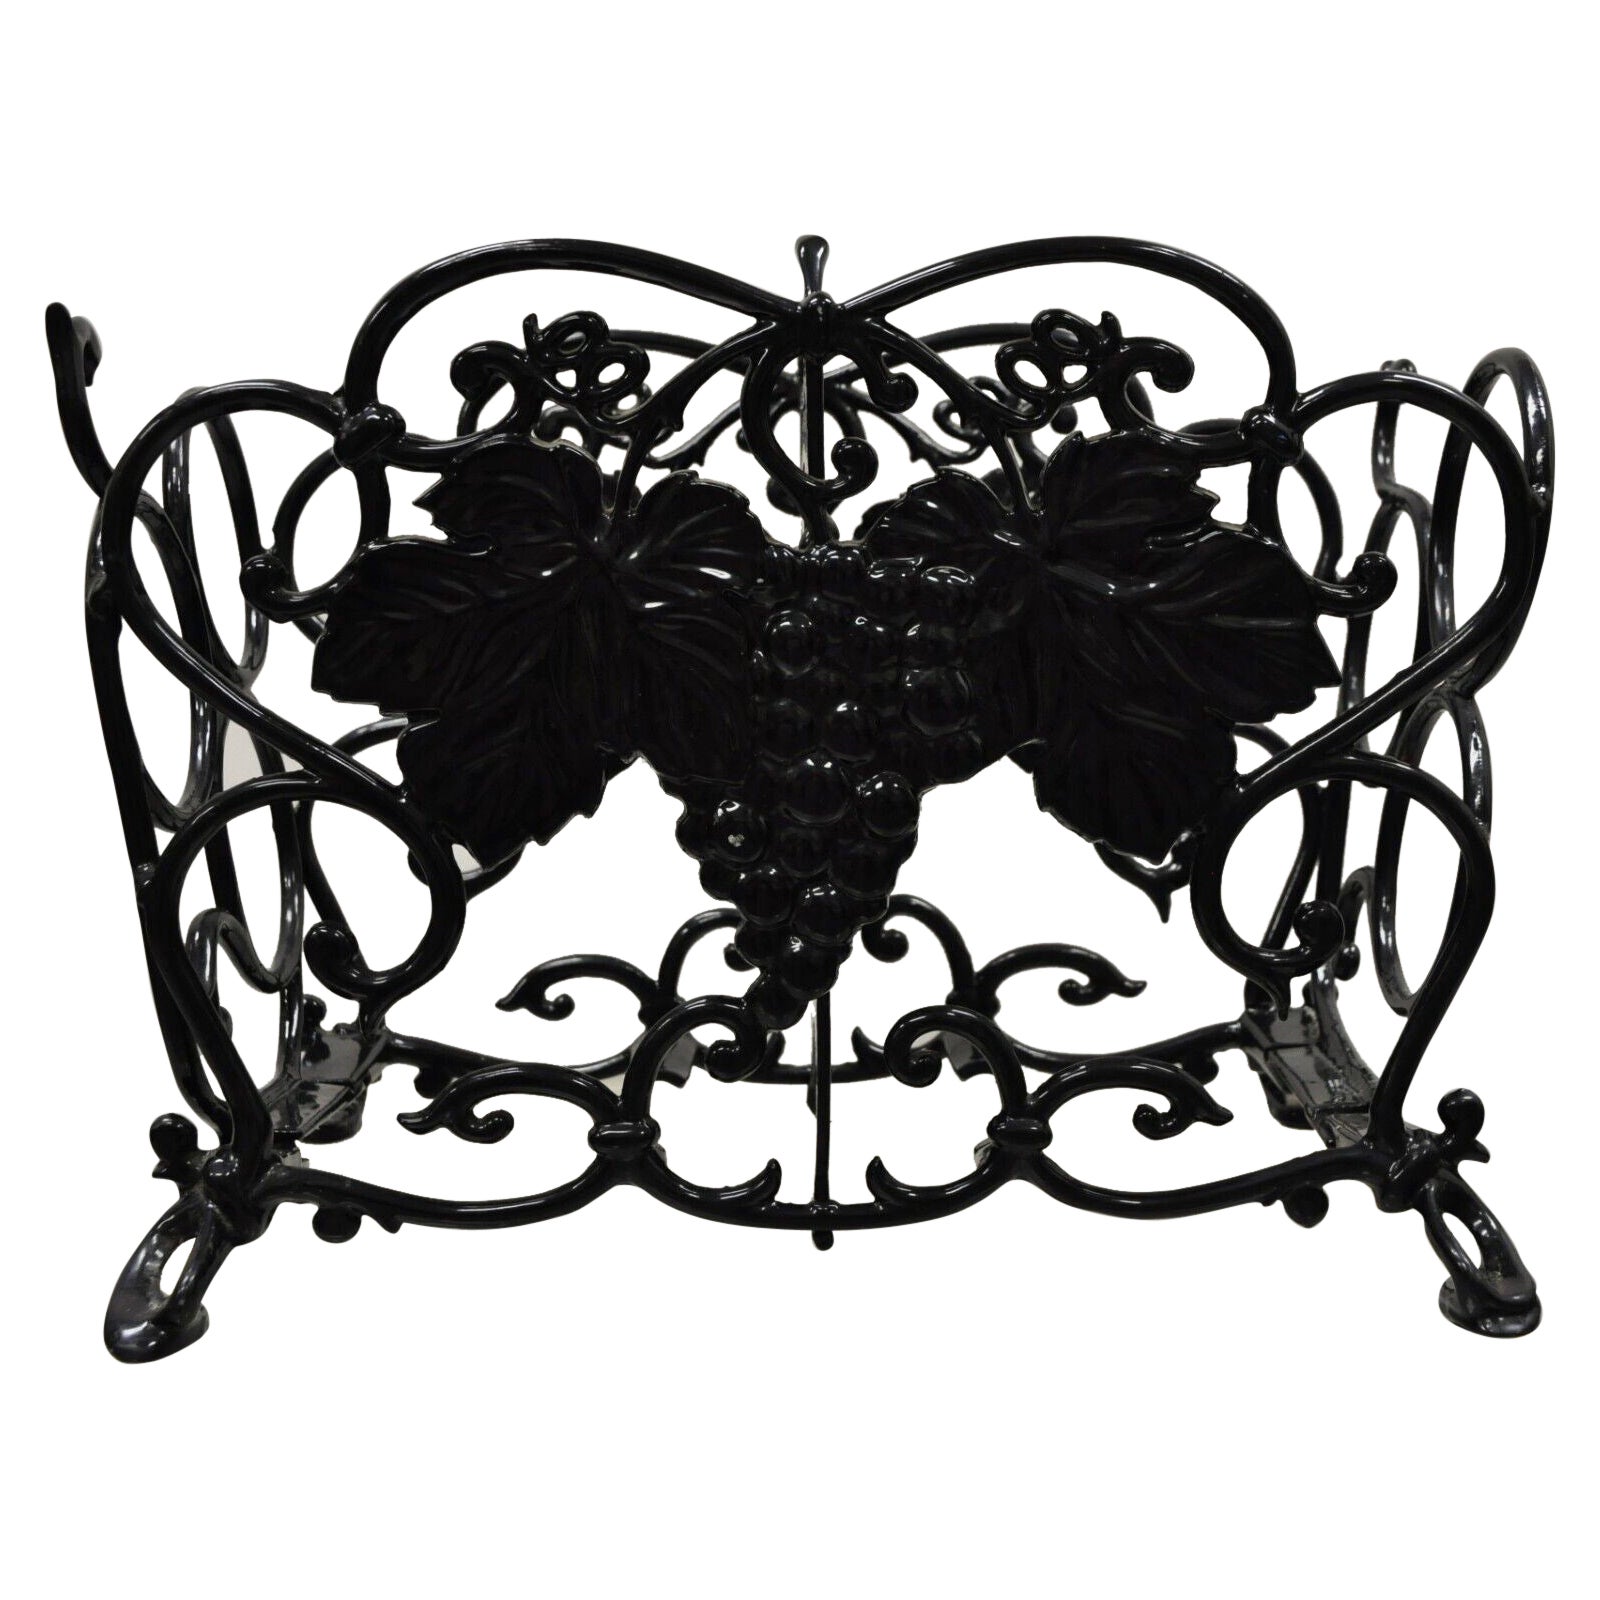 Vintage Victorian Style Black Cast Iron 6 Wine Bottle Rack Holder with Grapes